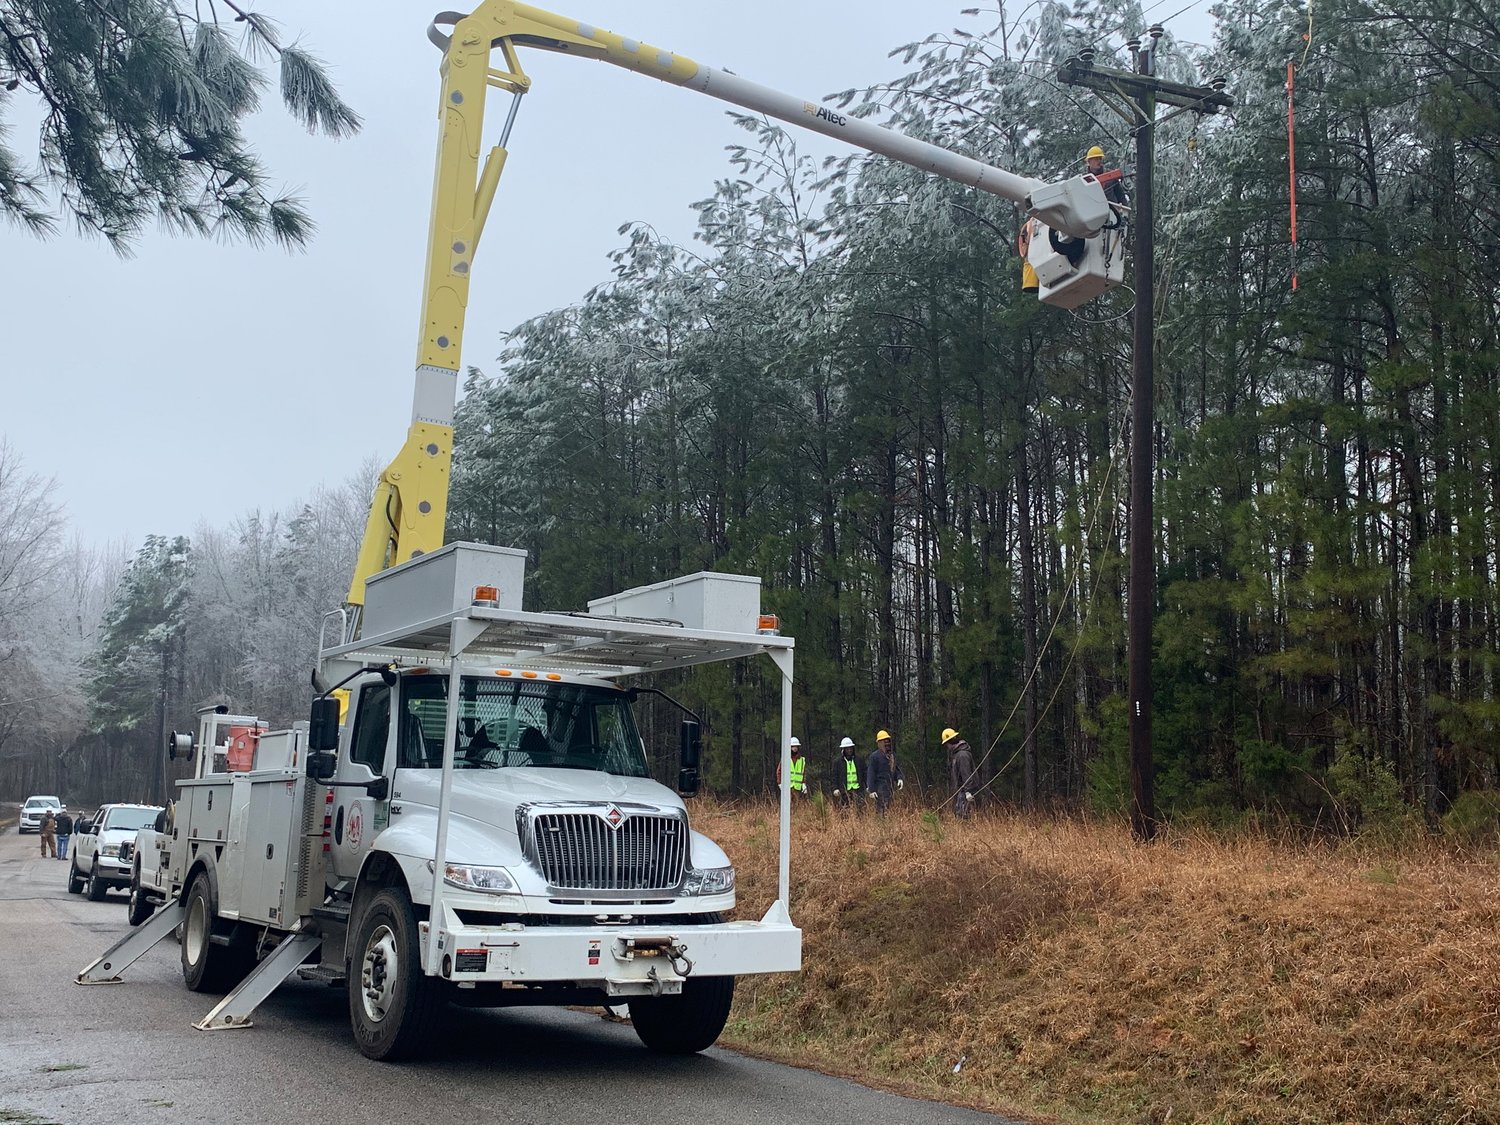 EMEPA crews work to restore power throughout parts of Kemper County following the winter storm that barrelled through Mississippi last week, causing a number of outages.